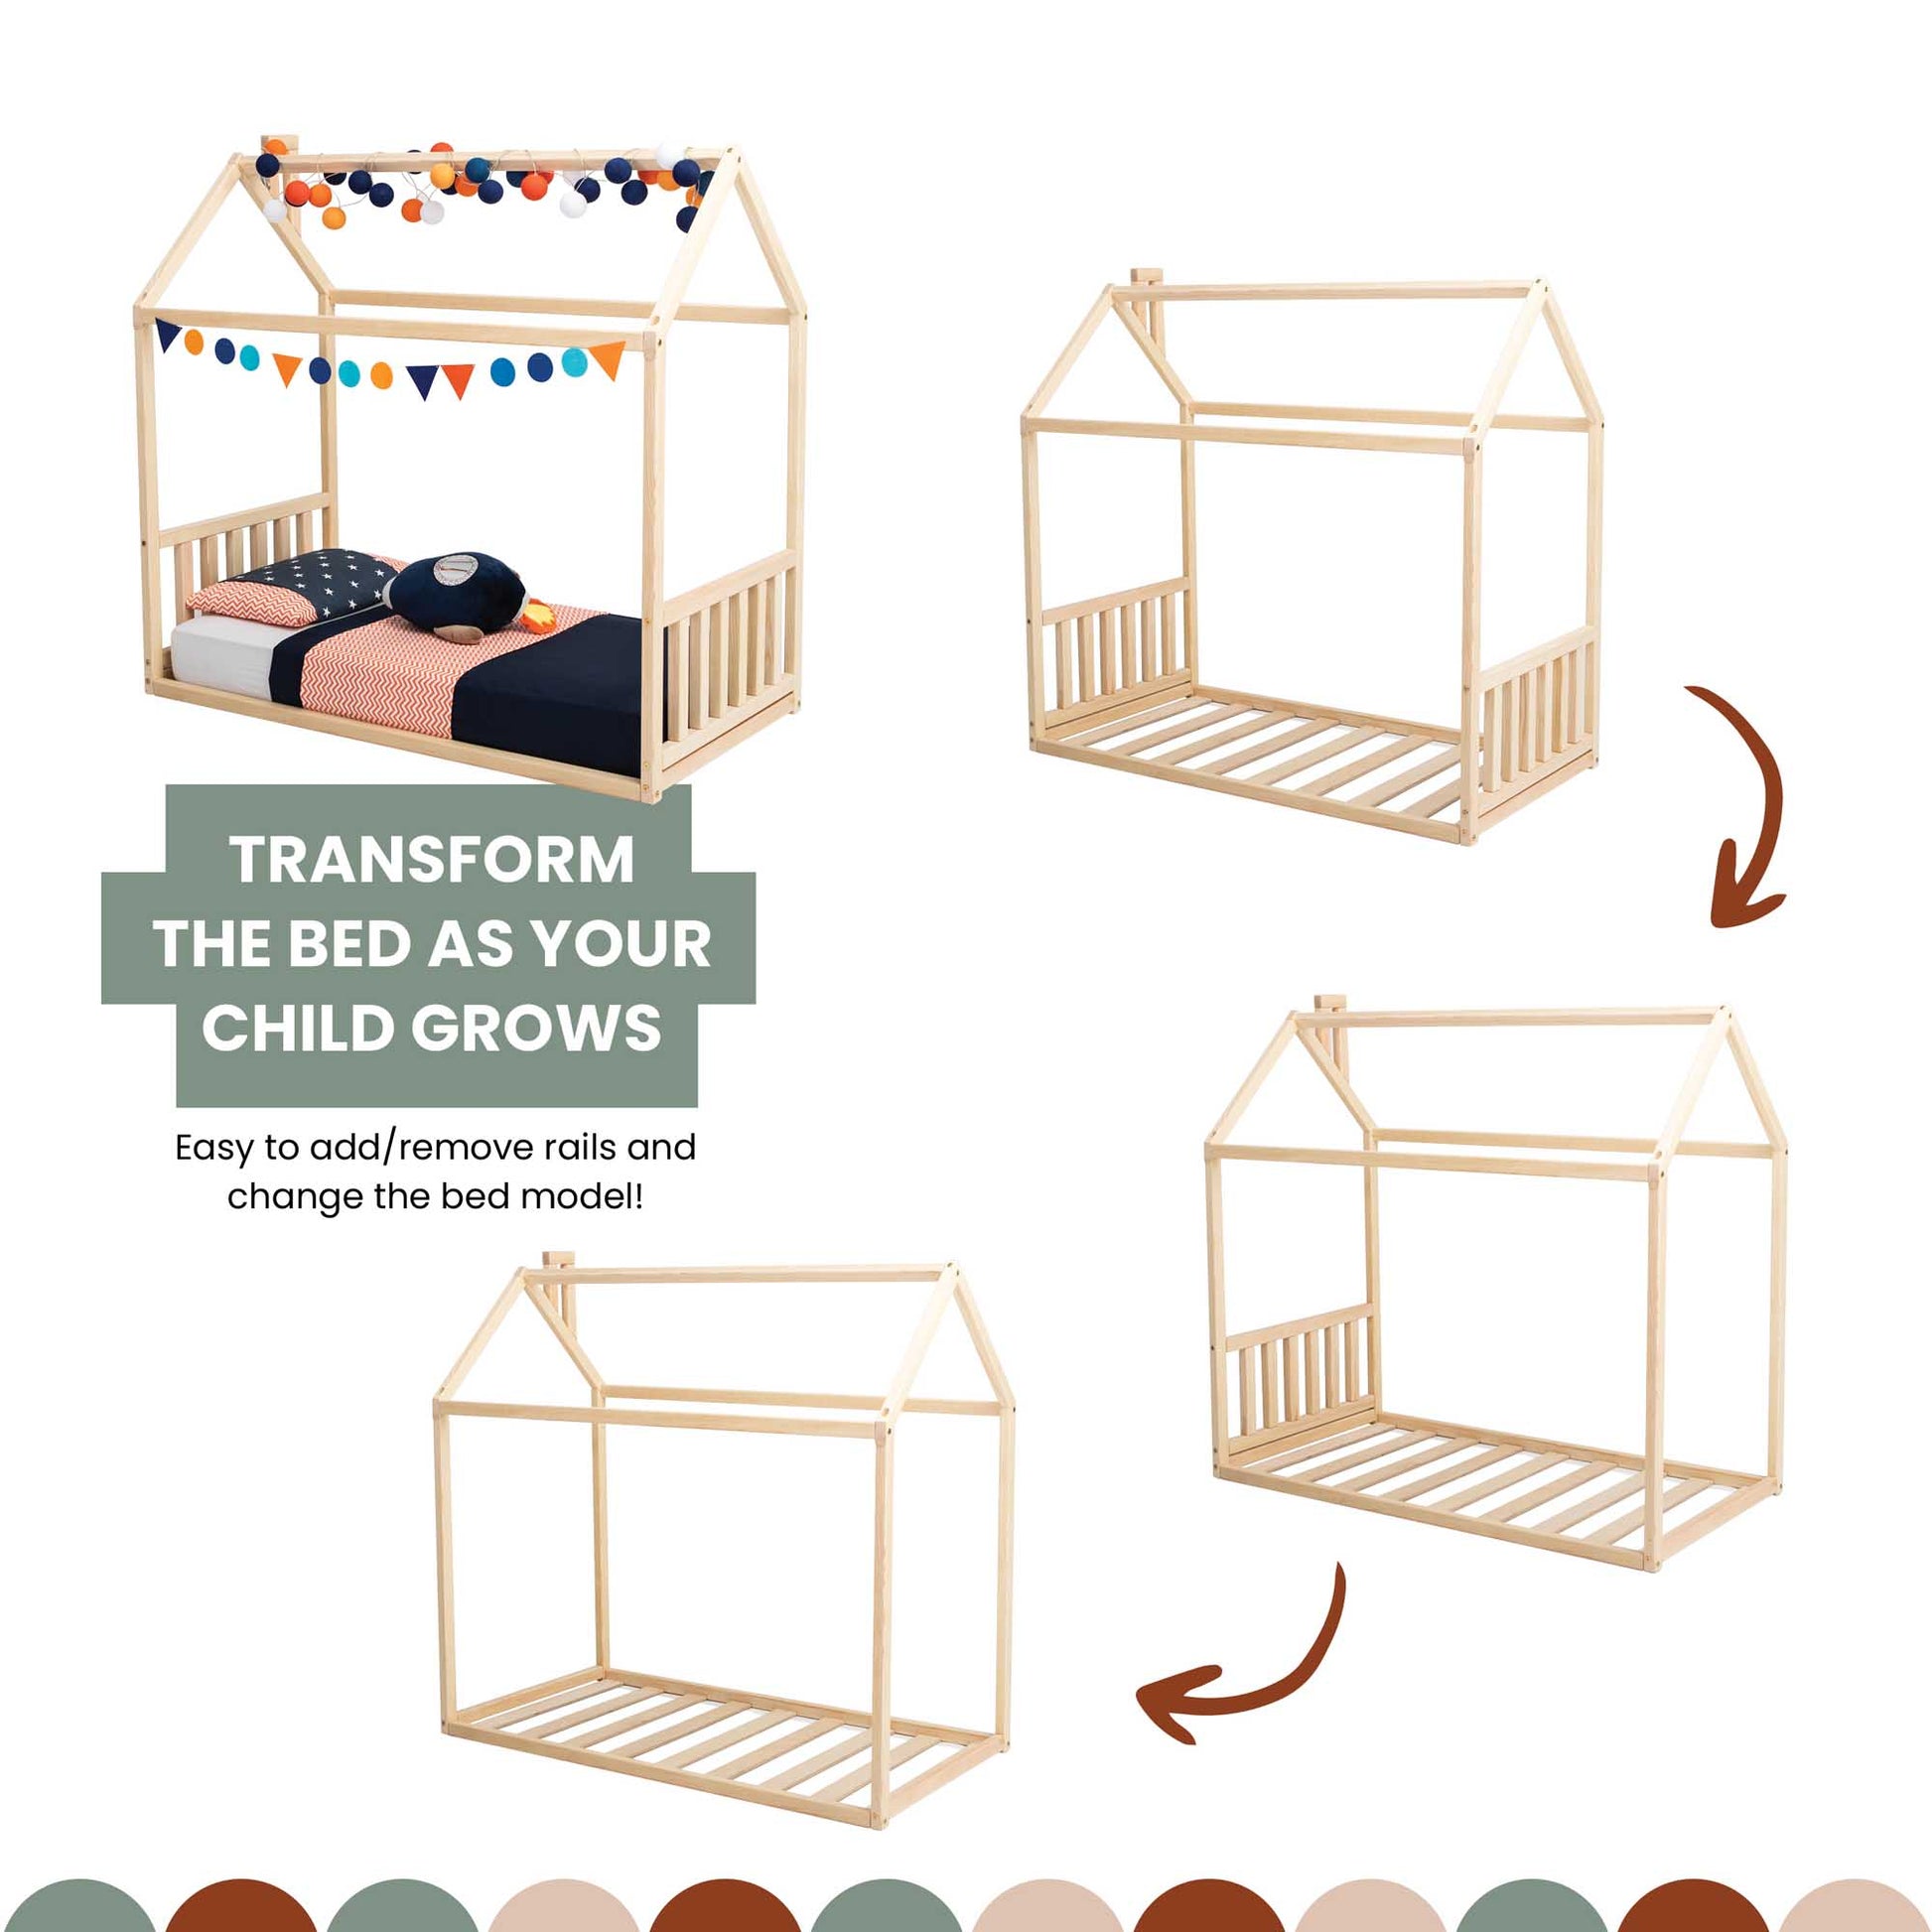 A cozy sleep haven where your child can grow, featuring a Sweet Home From Wood Montessori House Bed with a headboard and footboard.